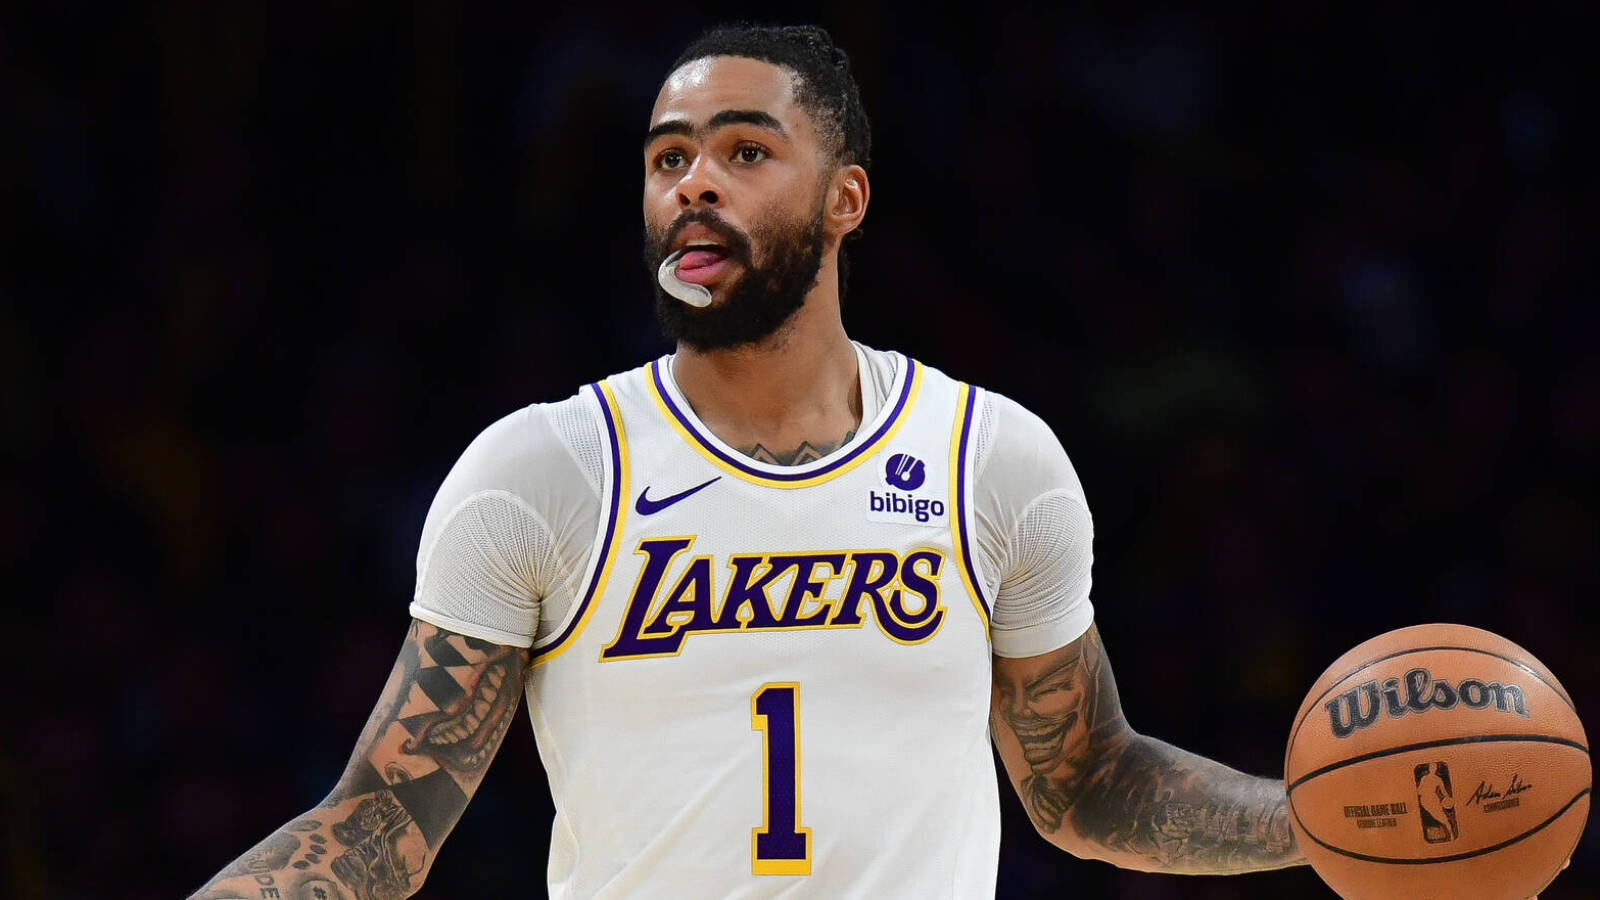 NBA announces punishment for Lakers star over actions in elimination game